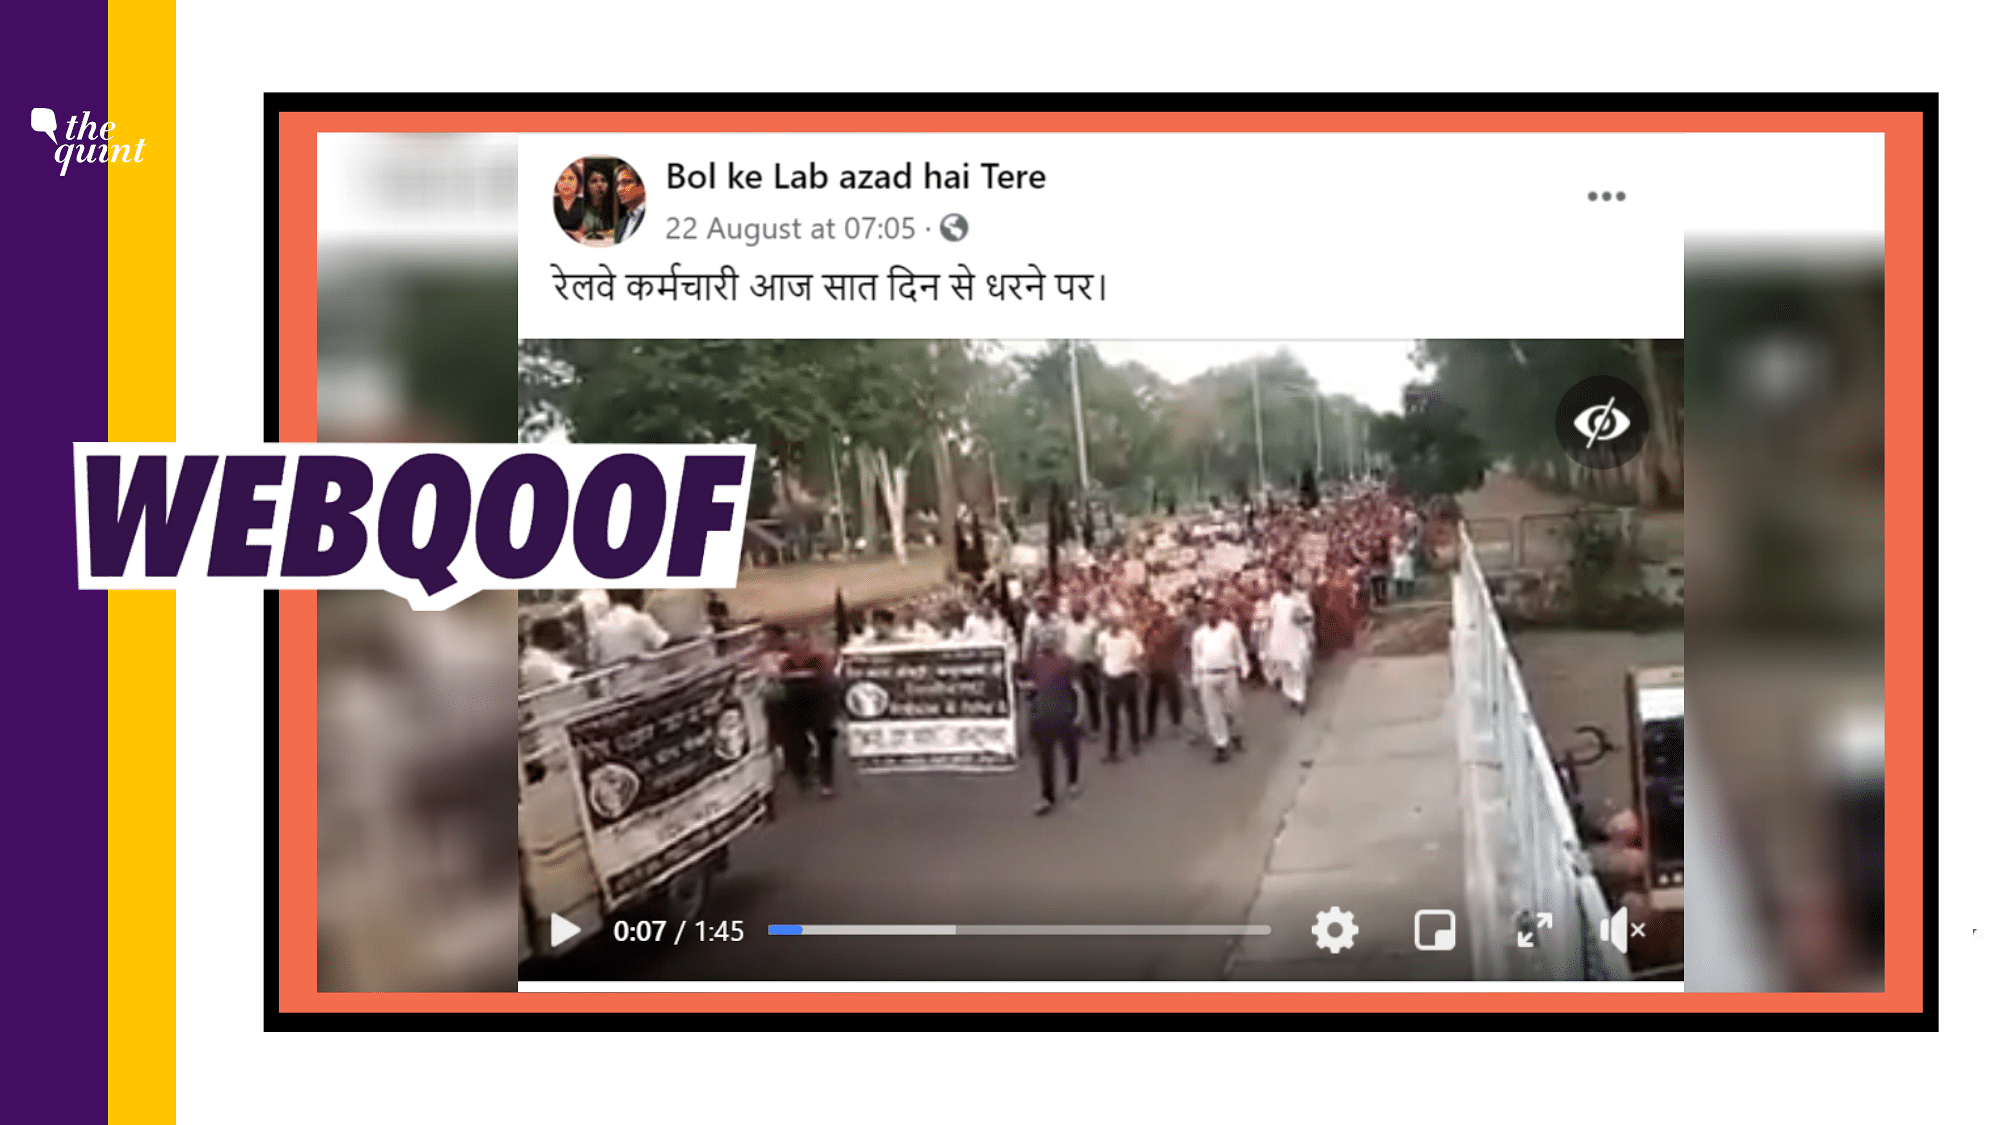 The video is actually from 2019 of workers at the Railway Coach Factory in Kapurthala.